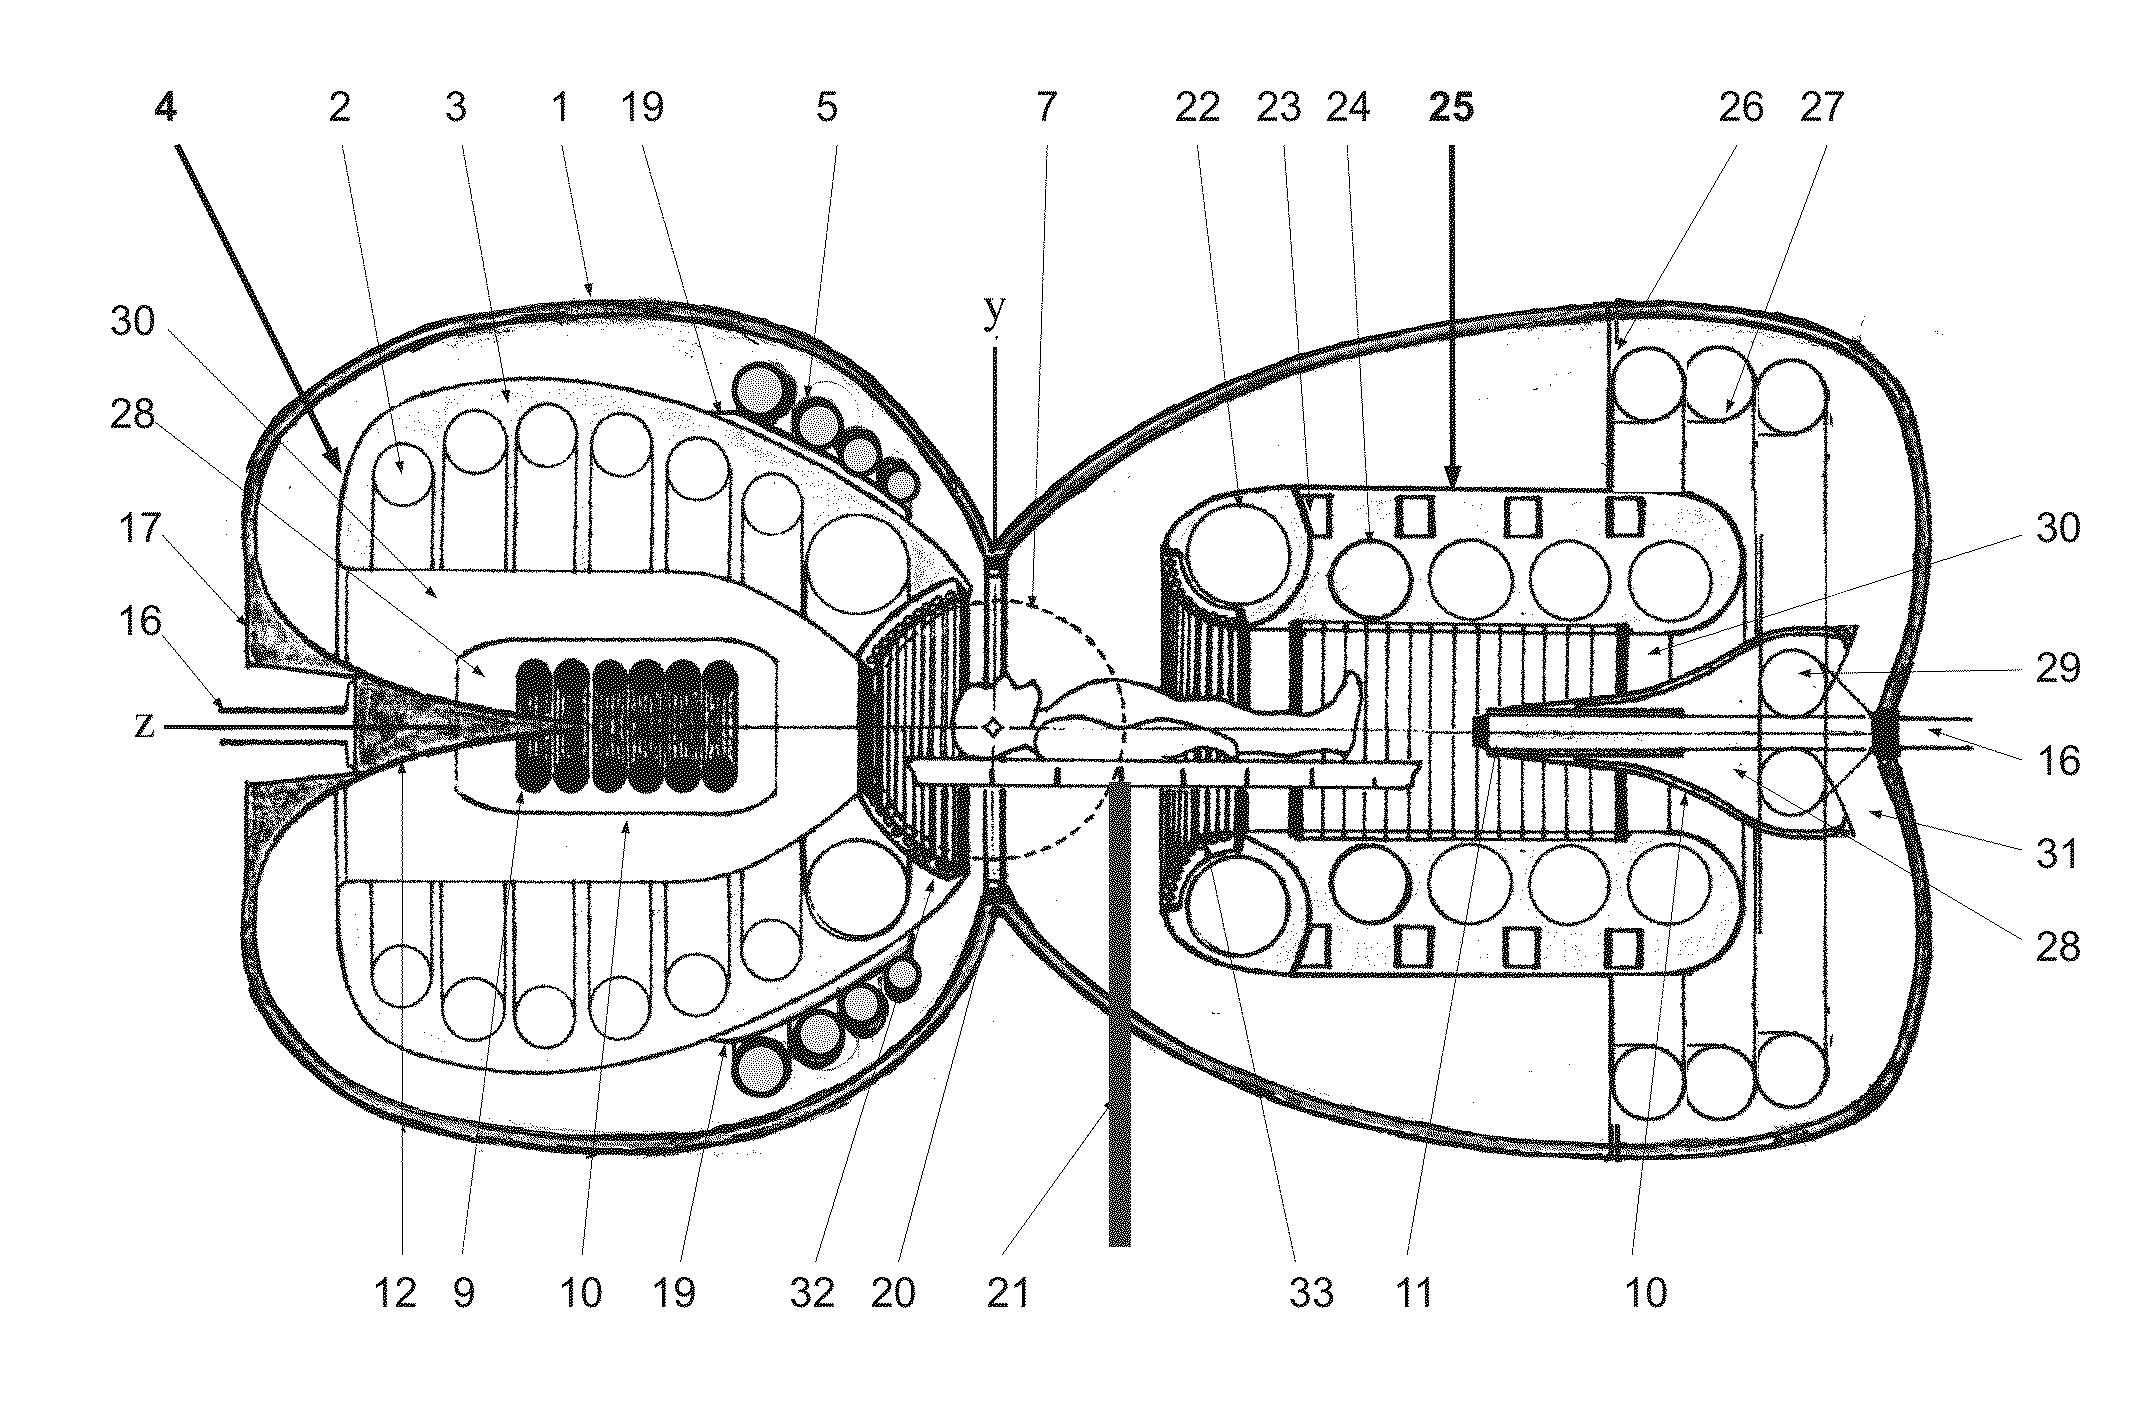 Magnetic field structures, field generators, navigation and imaging for untethered robotic device enabled medical procedure